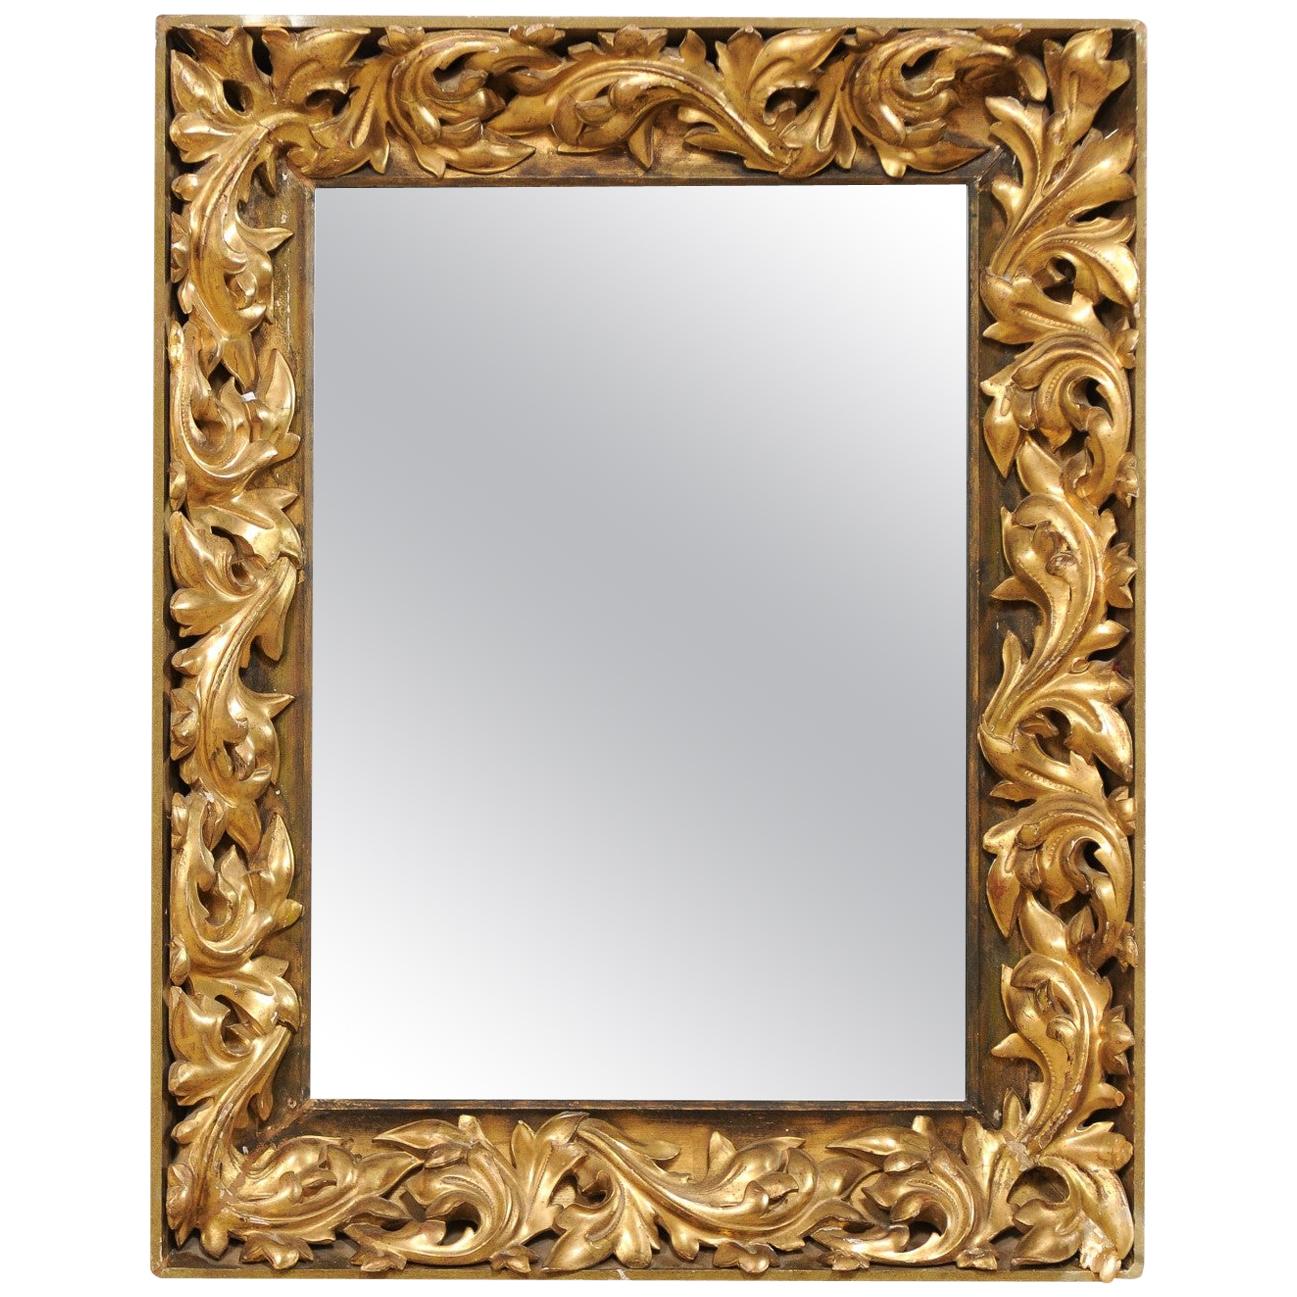 French 19th Century Rectangular-Shaped, Rococo Carved and Giltwood Mirror For Sale